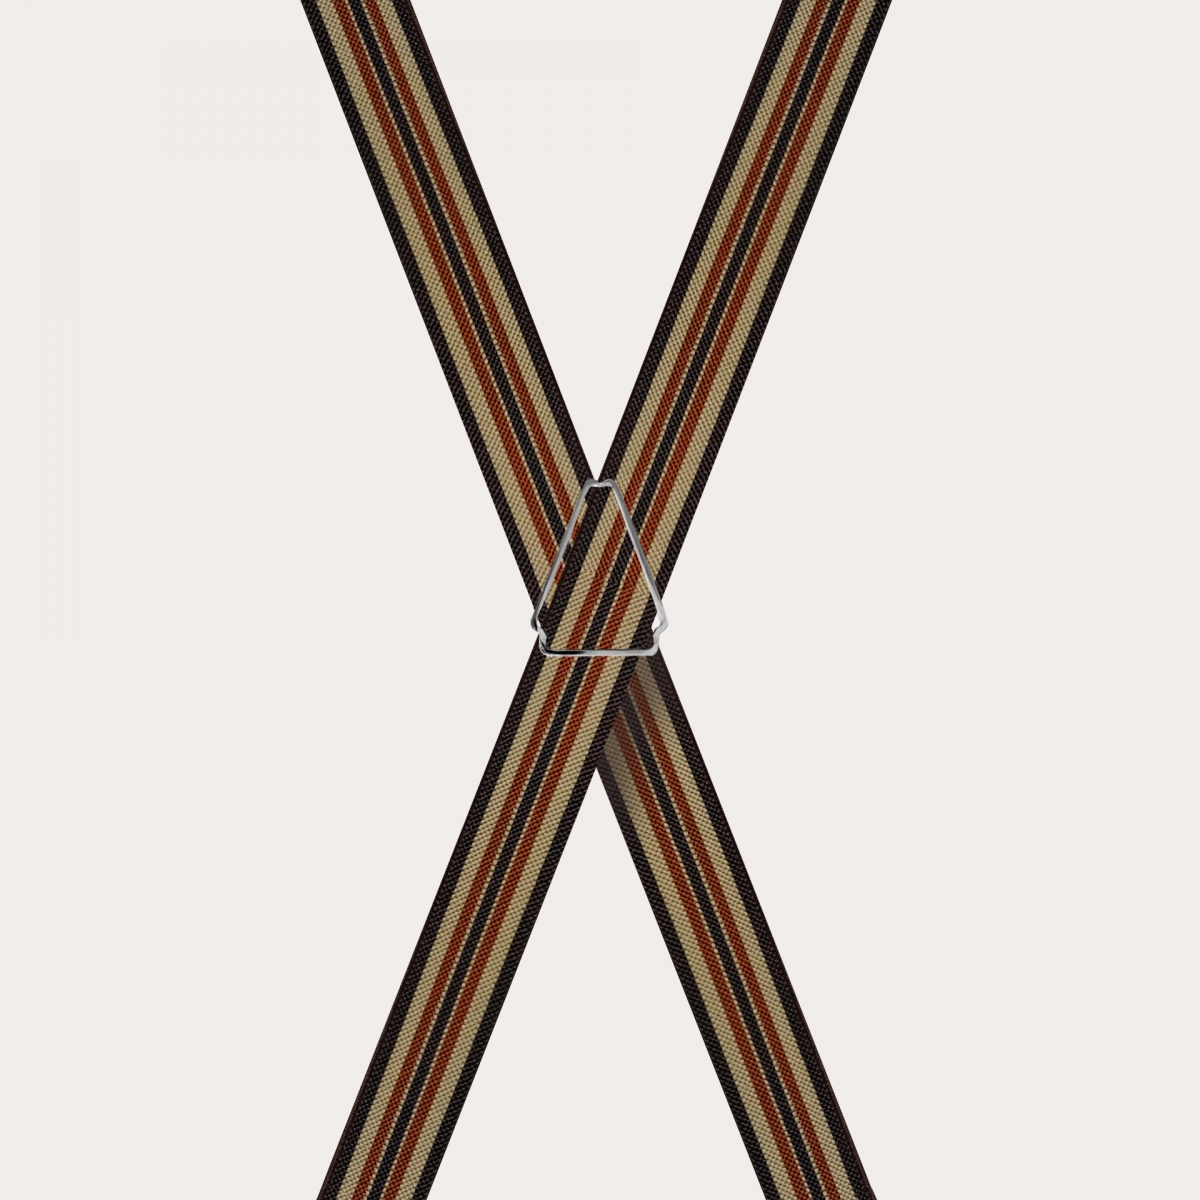 BRUCLE Striped elastic X-shaped suspenders, brown and khaki